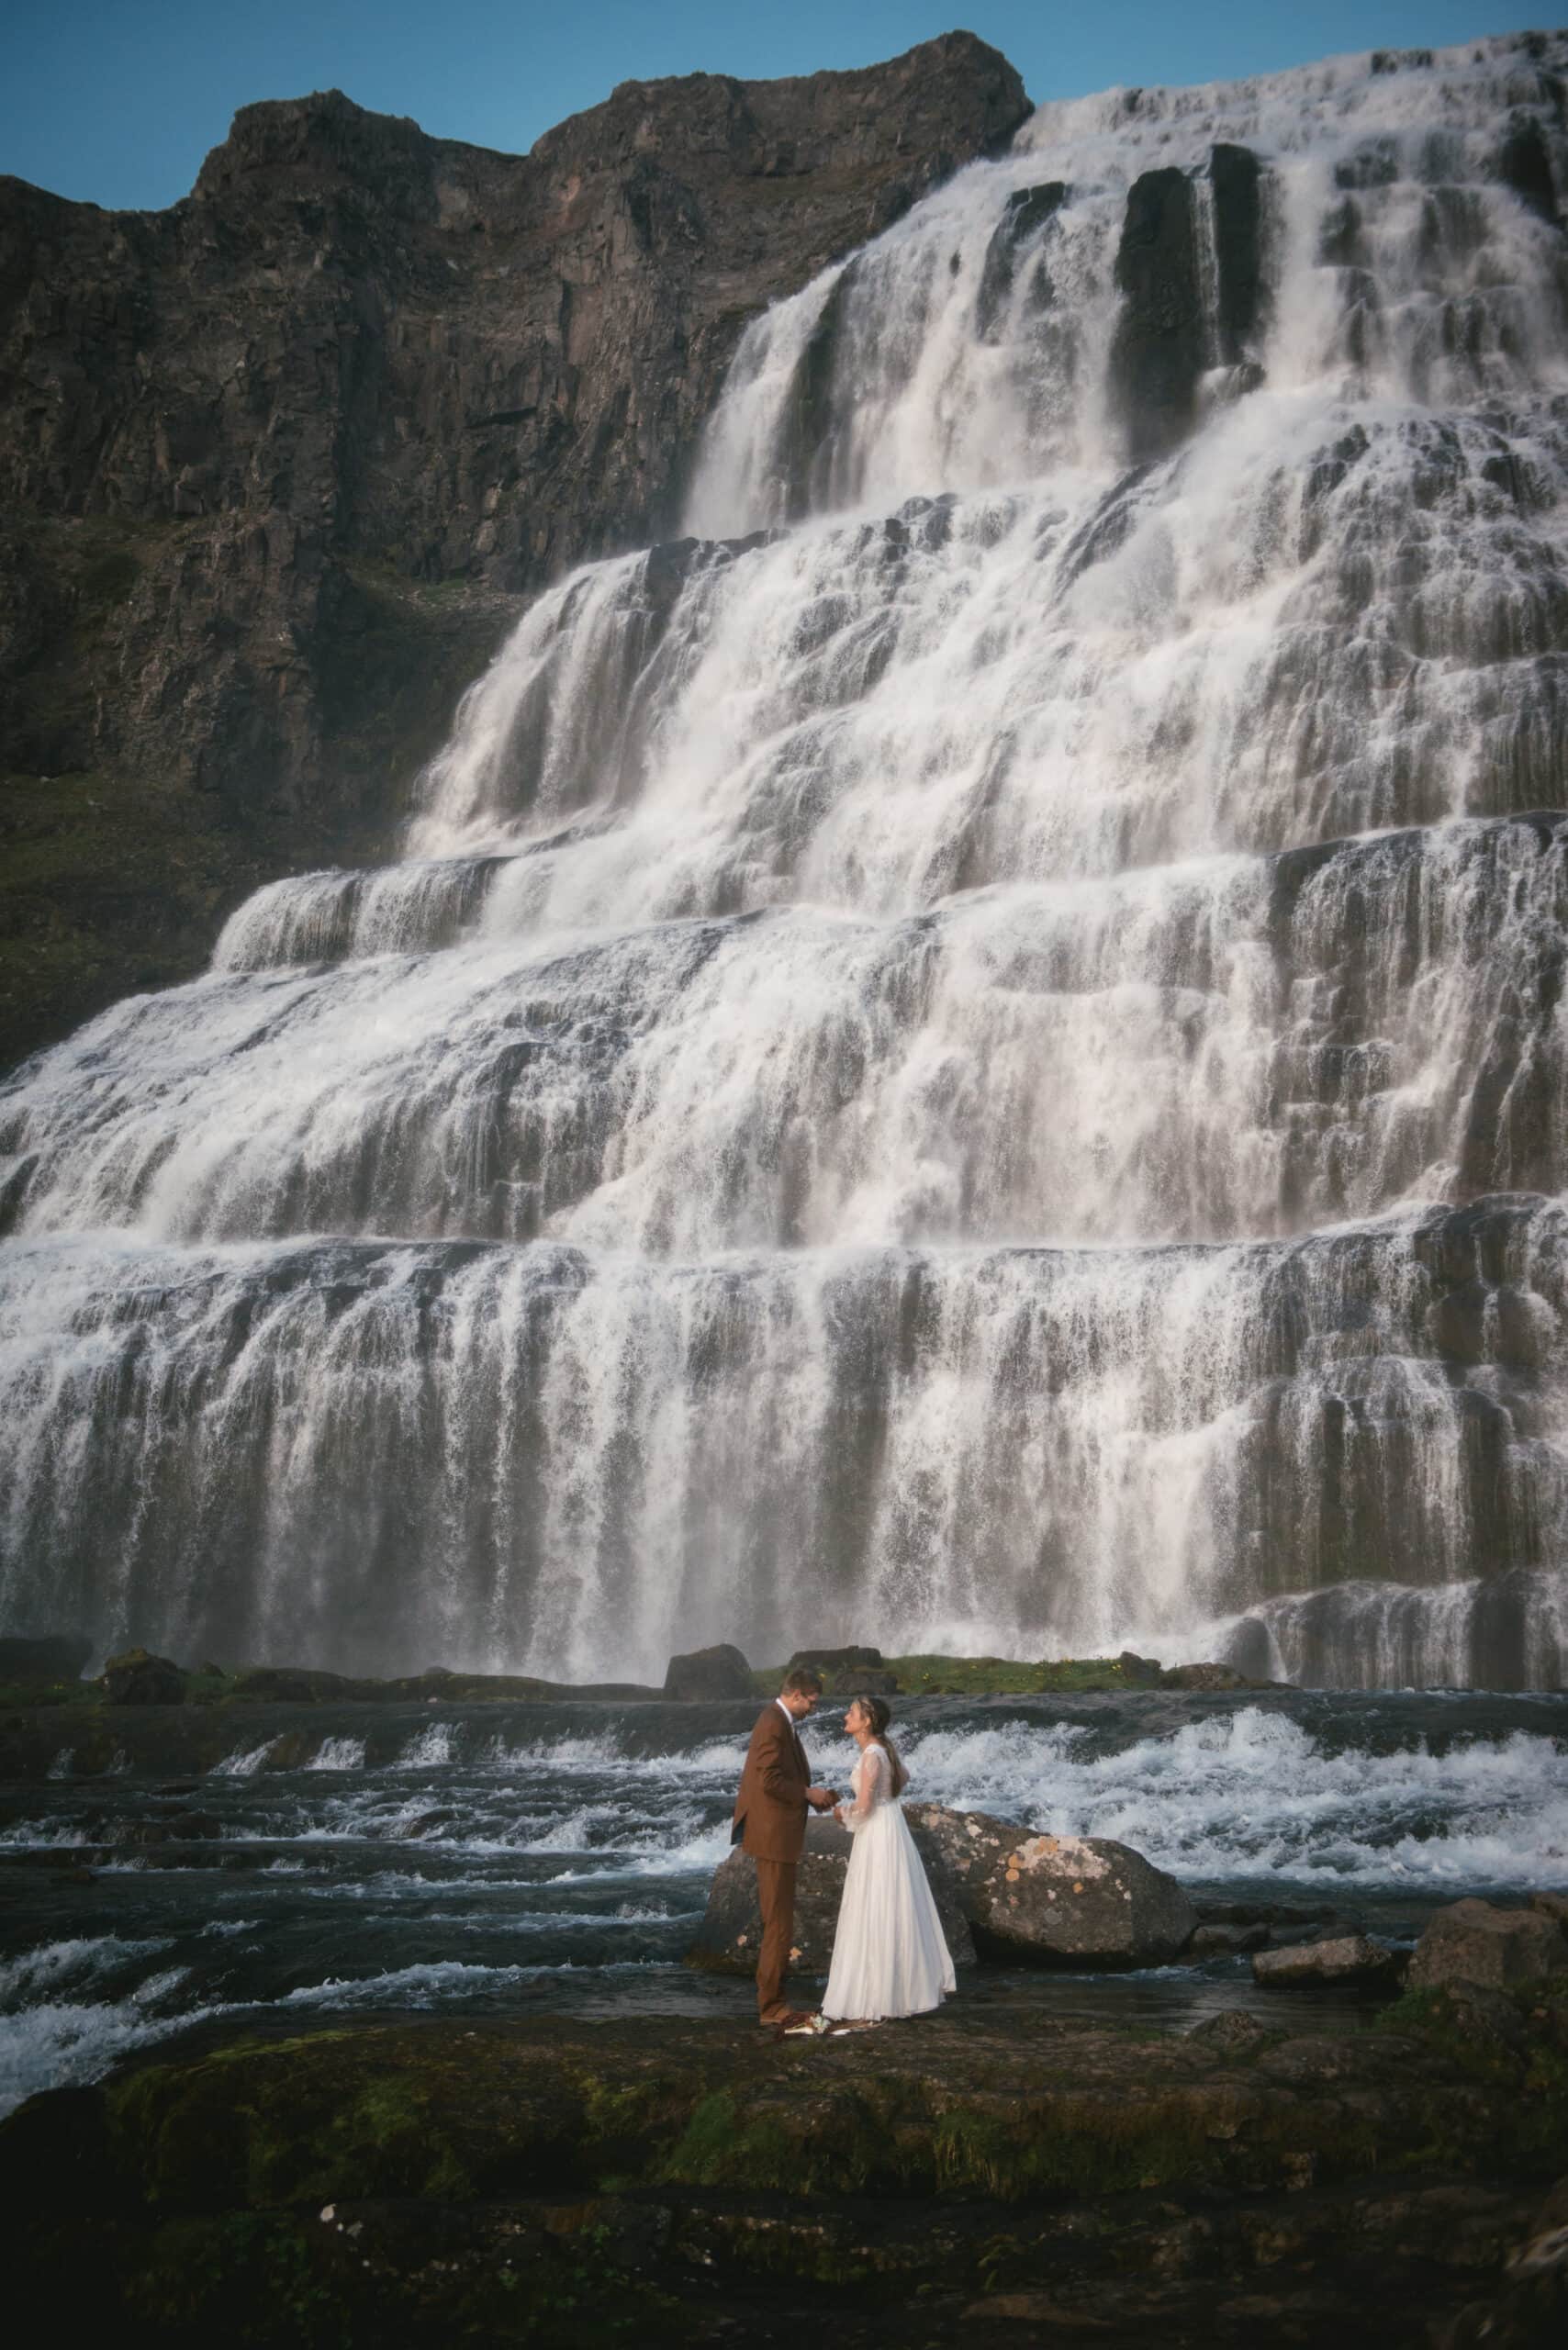 Intimate moment as the couple exchanges vows with a breathtaking waterfall backdrop.